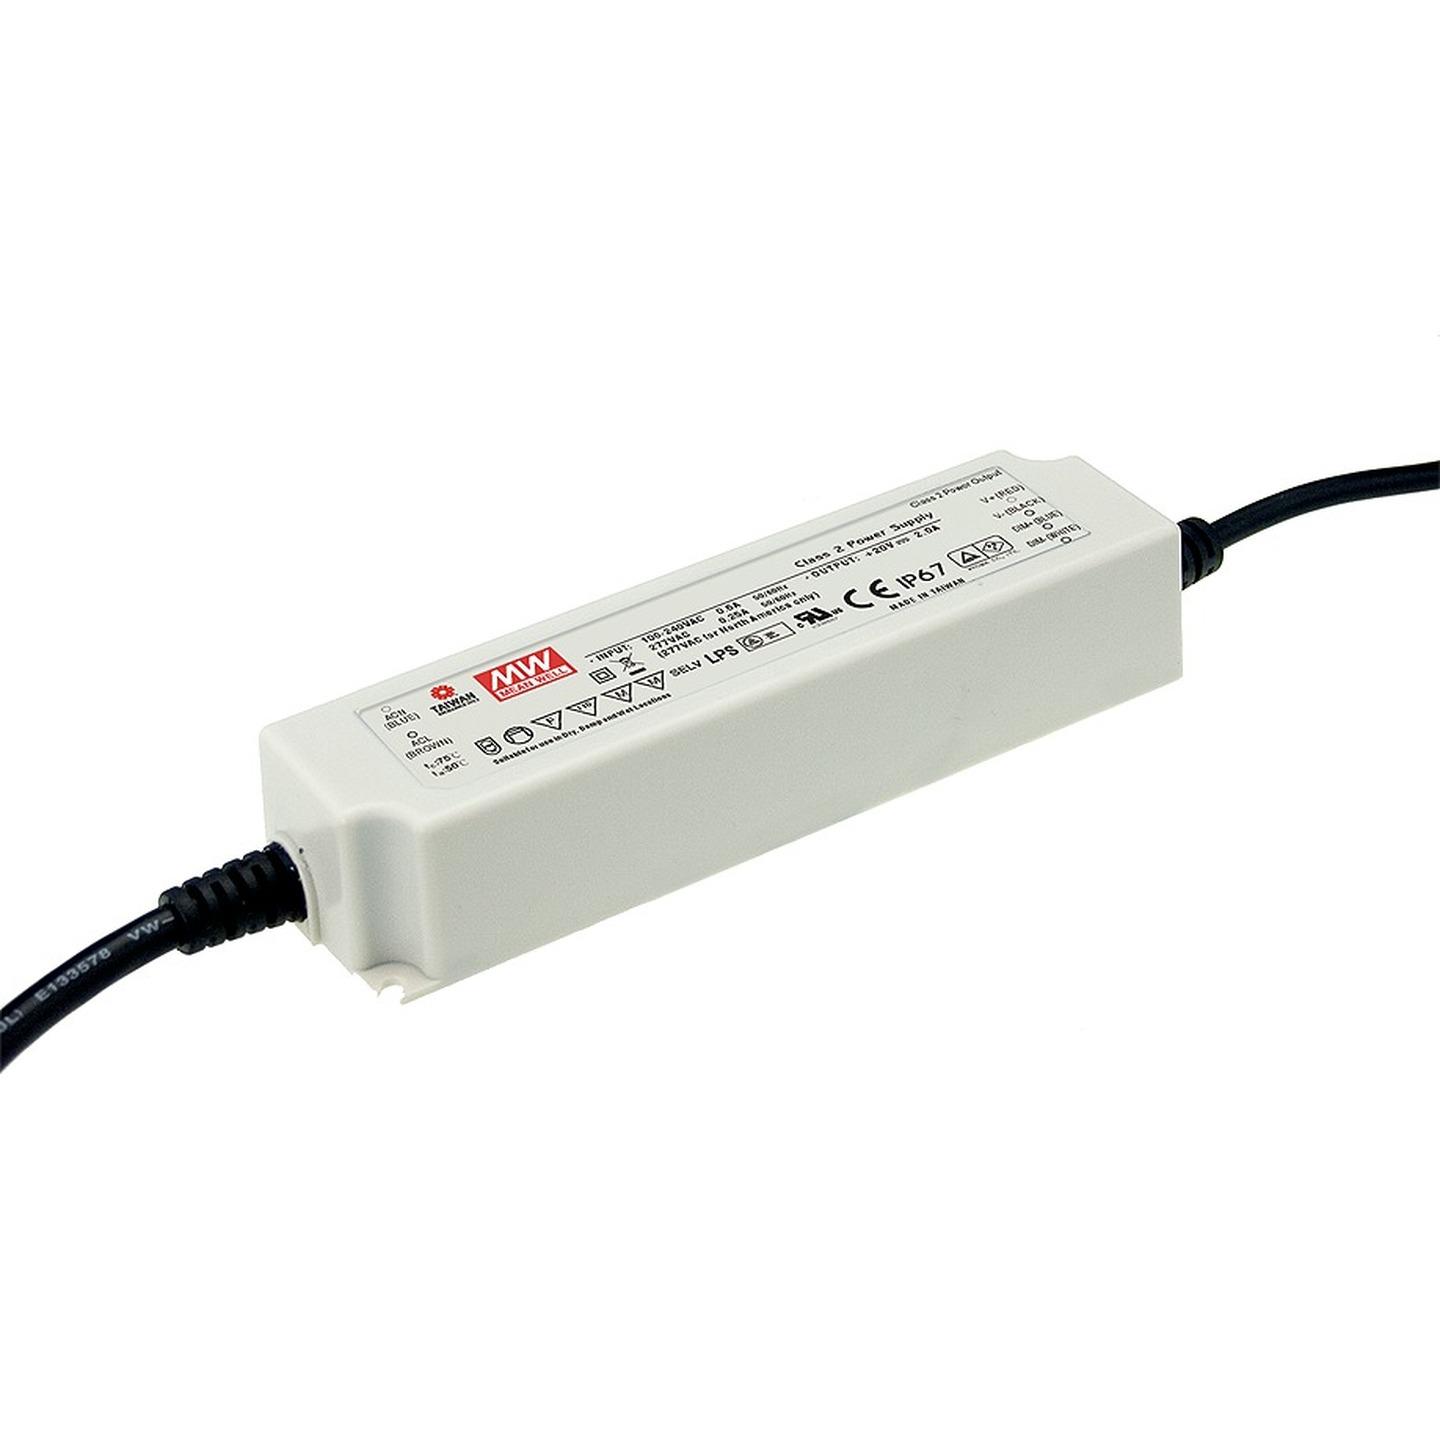 40W 24V 1.67A Dimmable LED Power Supply